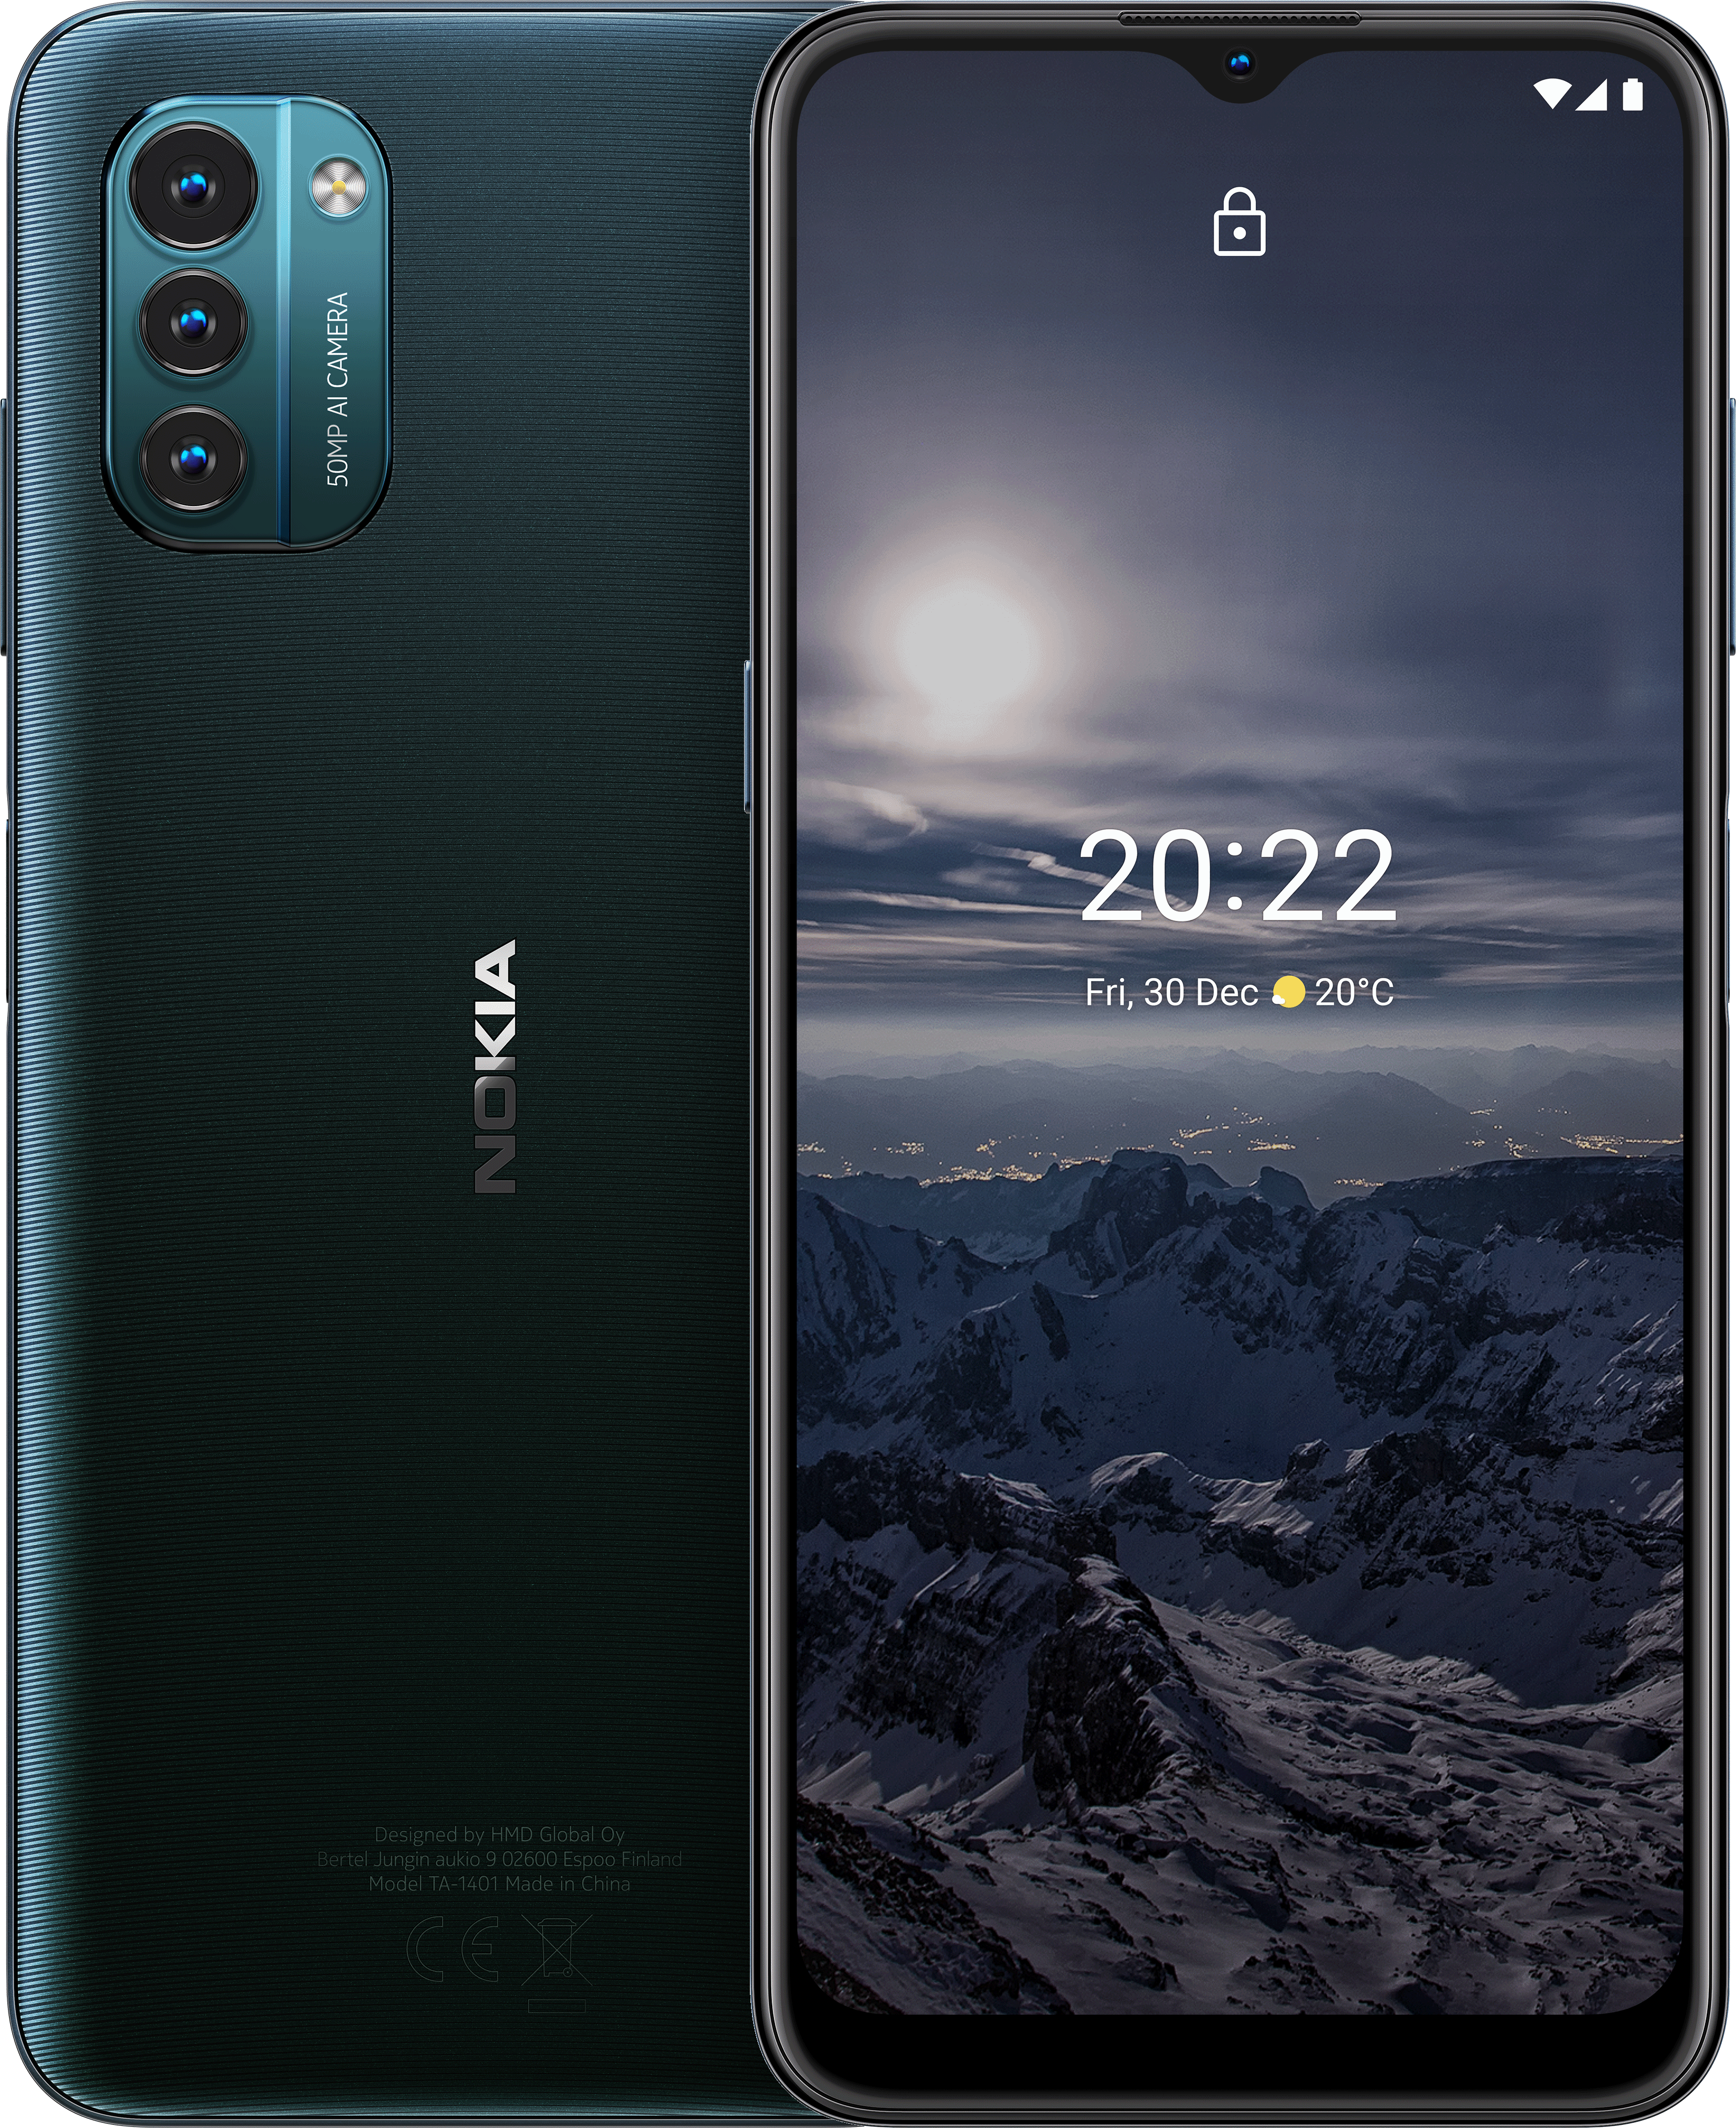 Nokia smartphones with latest Android 12 OS upgrades